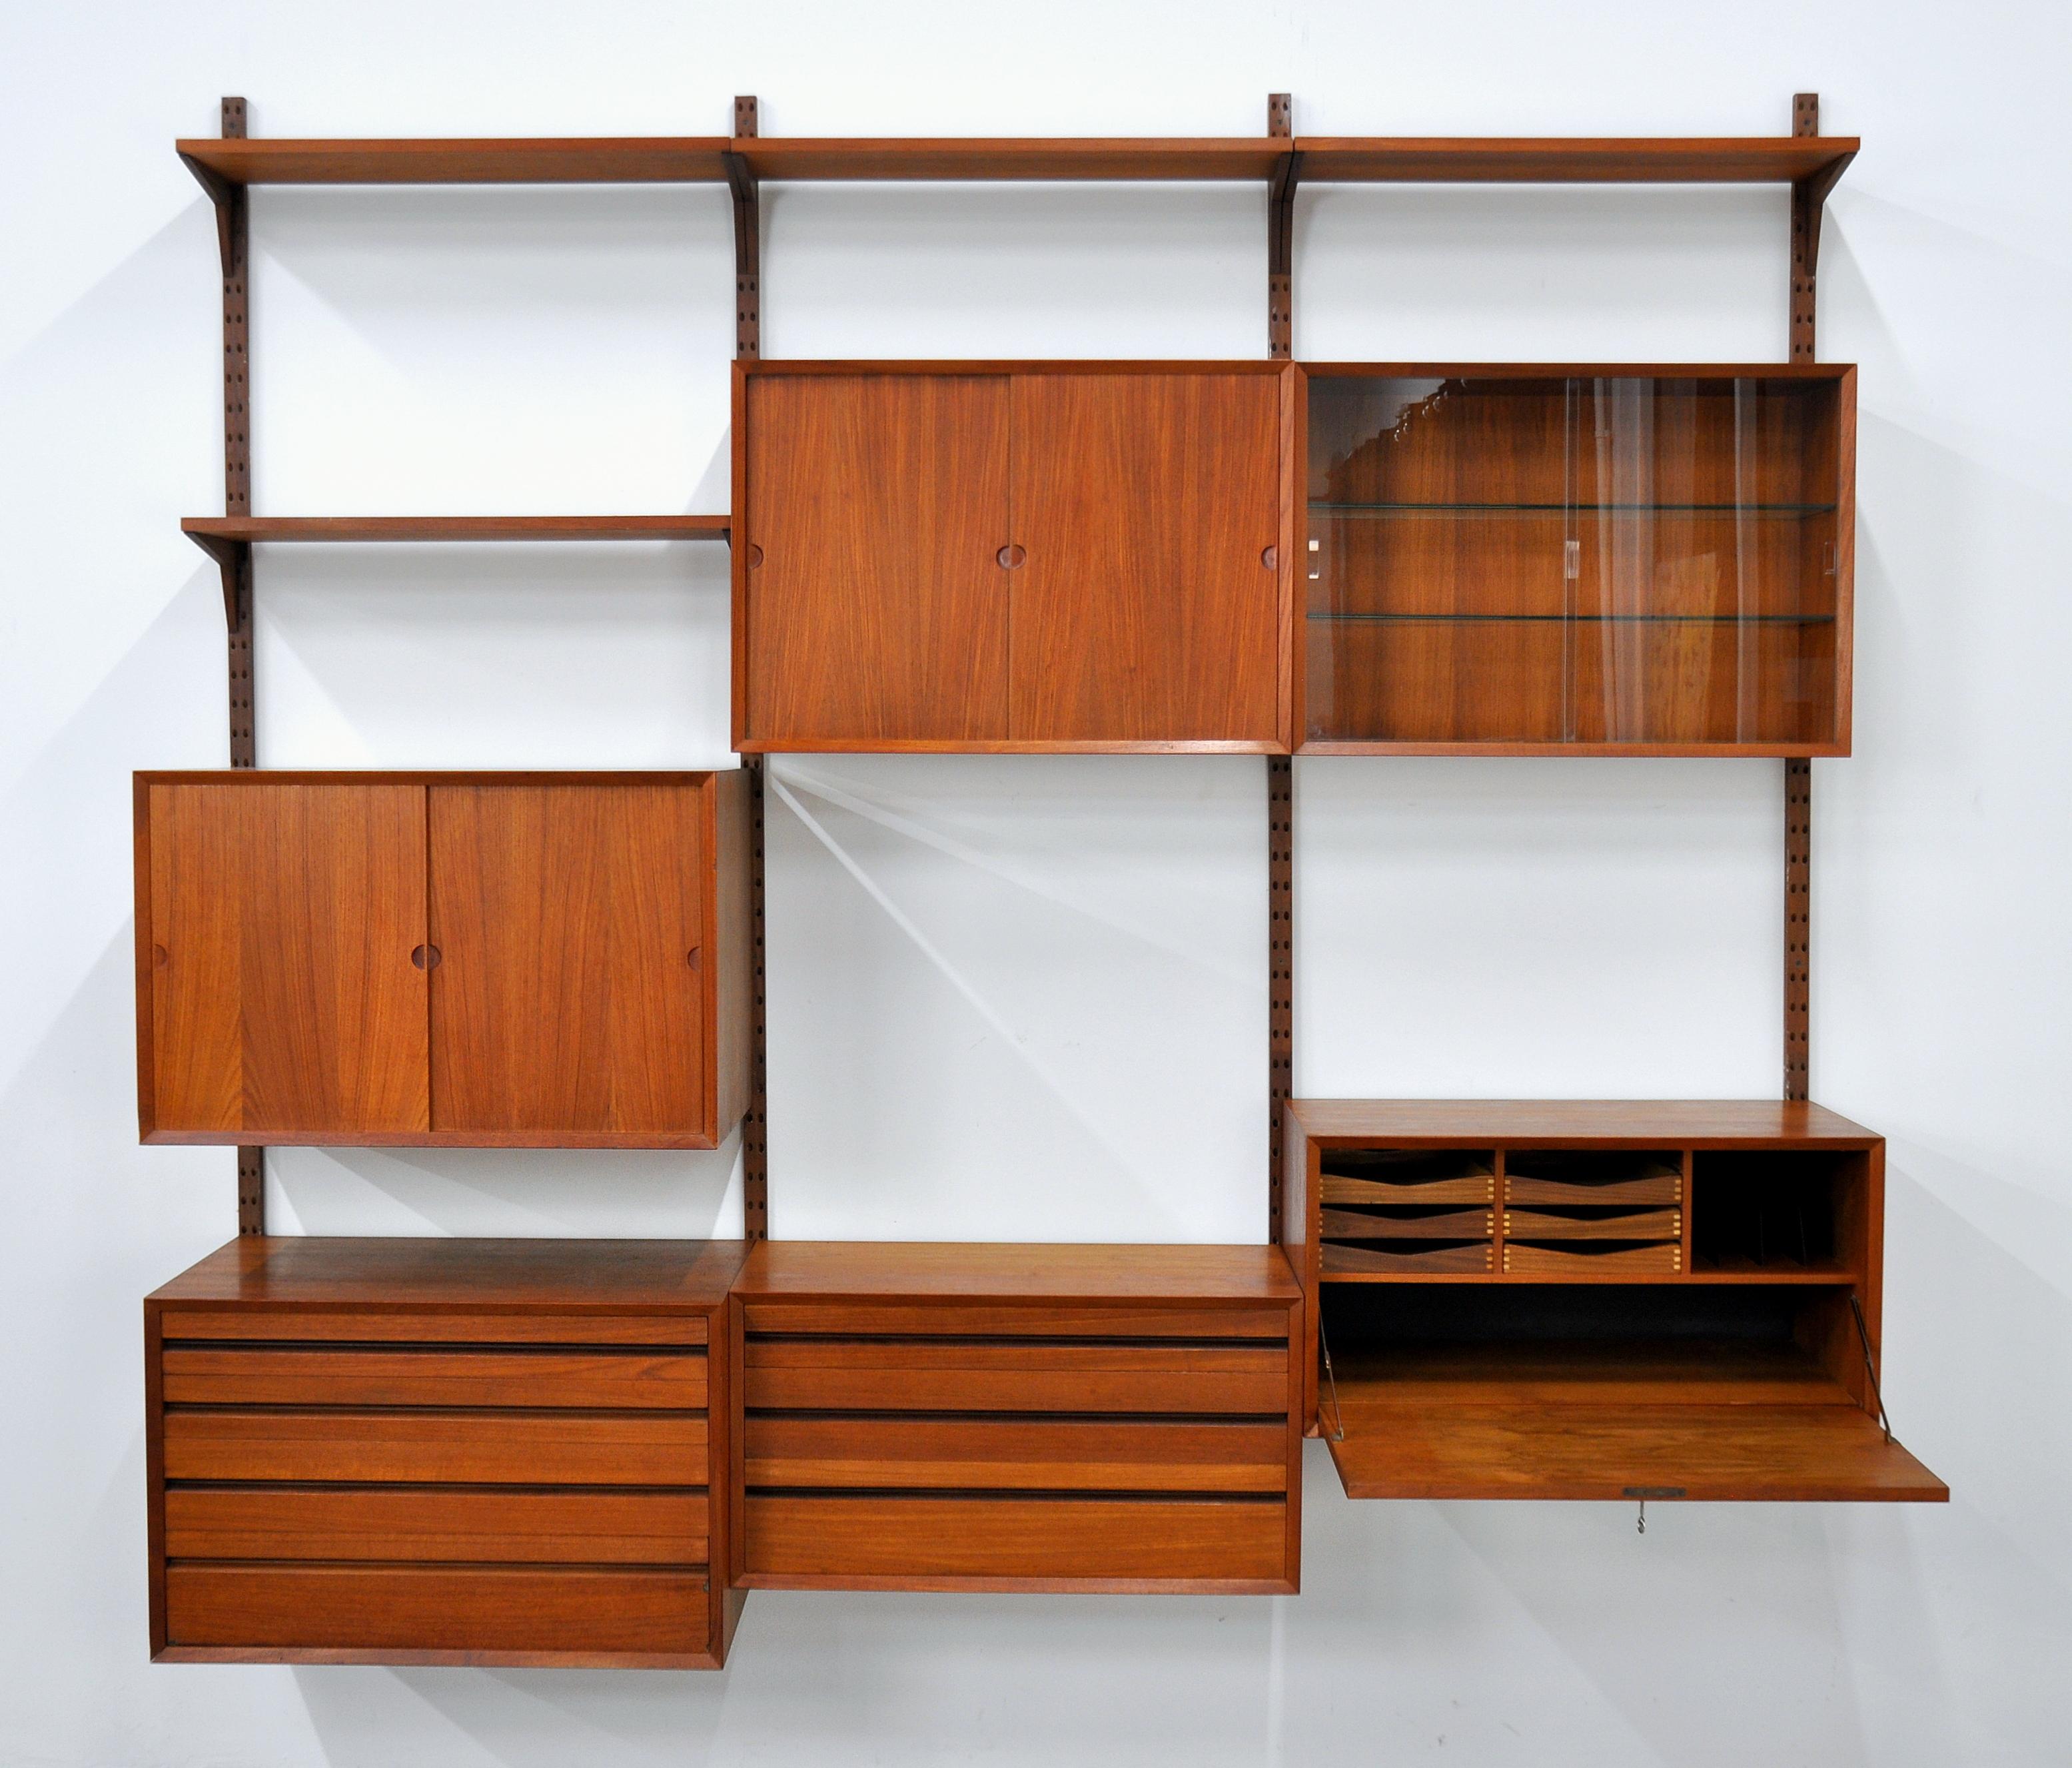 A splendid midcentury Danish Modern vintage three bay teak system, designed by Poul Cadovious and manufactured by Cado in the 1960s. The modular bookcase system includes:
- Cabinet with four drawers, 31.5 in x 18.13 in x 20.25 in H
- Cabinet with